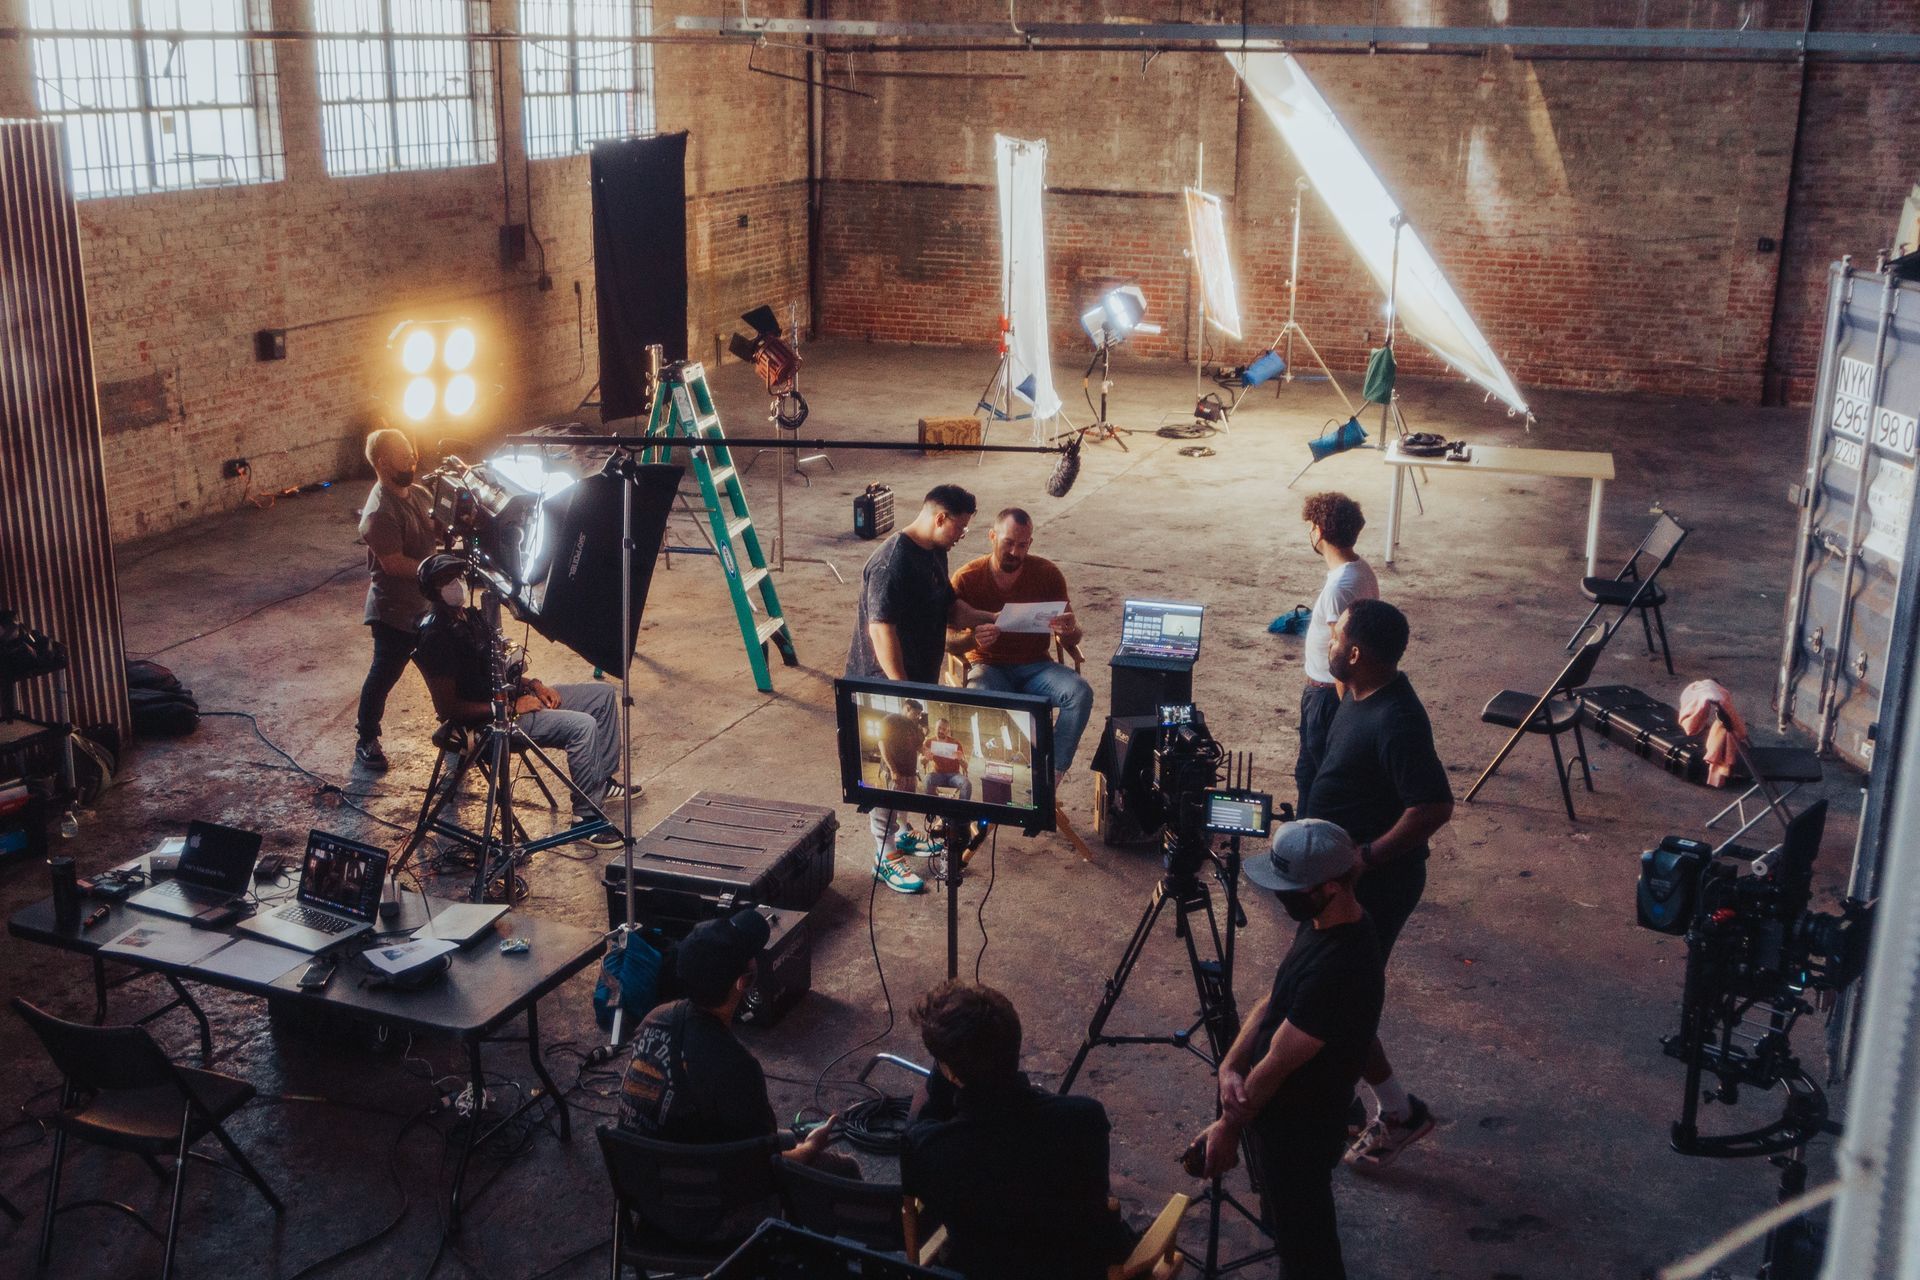 Behind the scenes film shoot in a warehouse